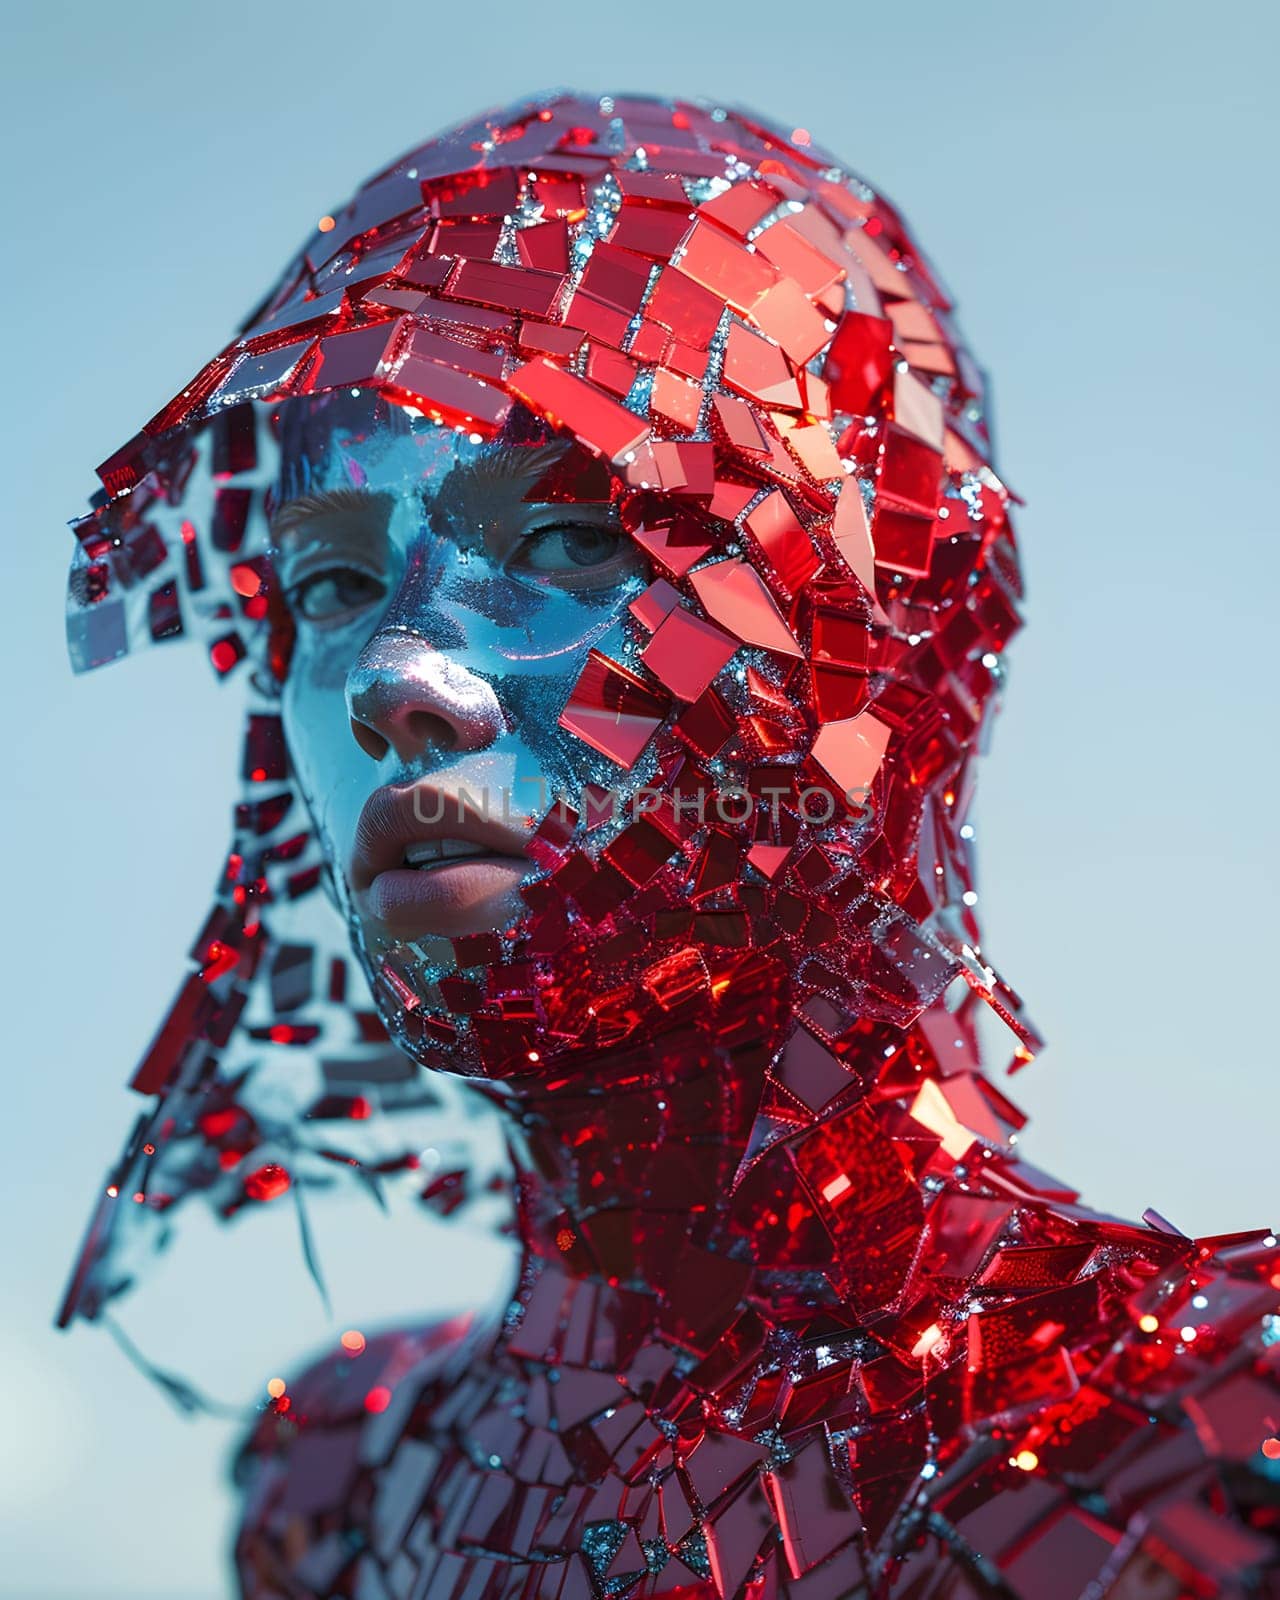 Close up of human face with red sequins, beard and electric blue pattern by Nadtochiy